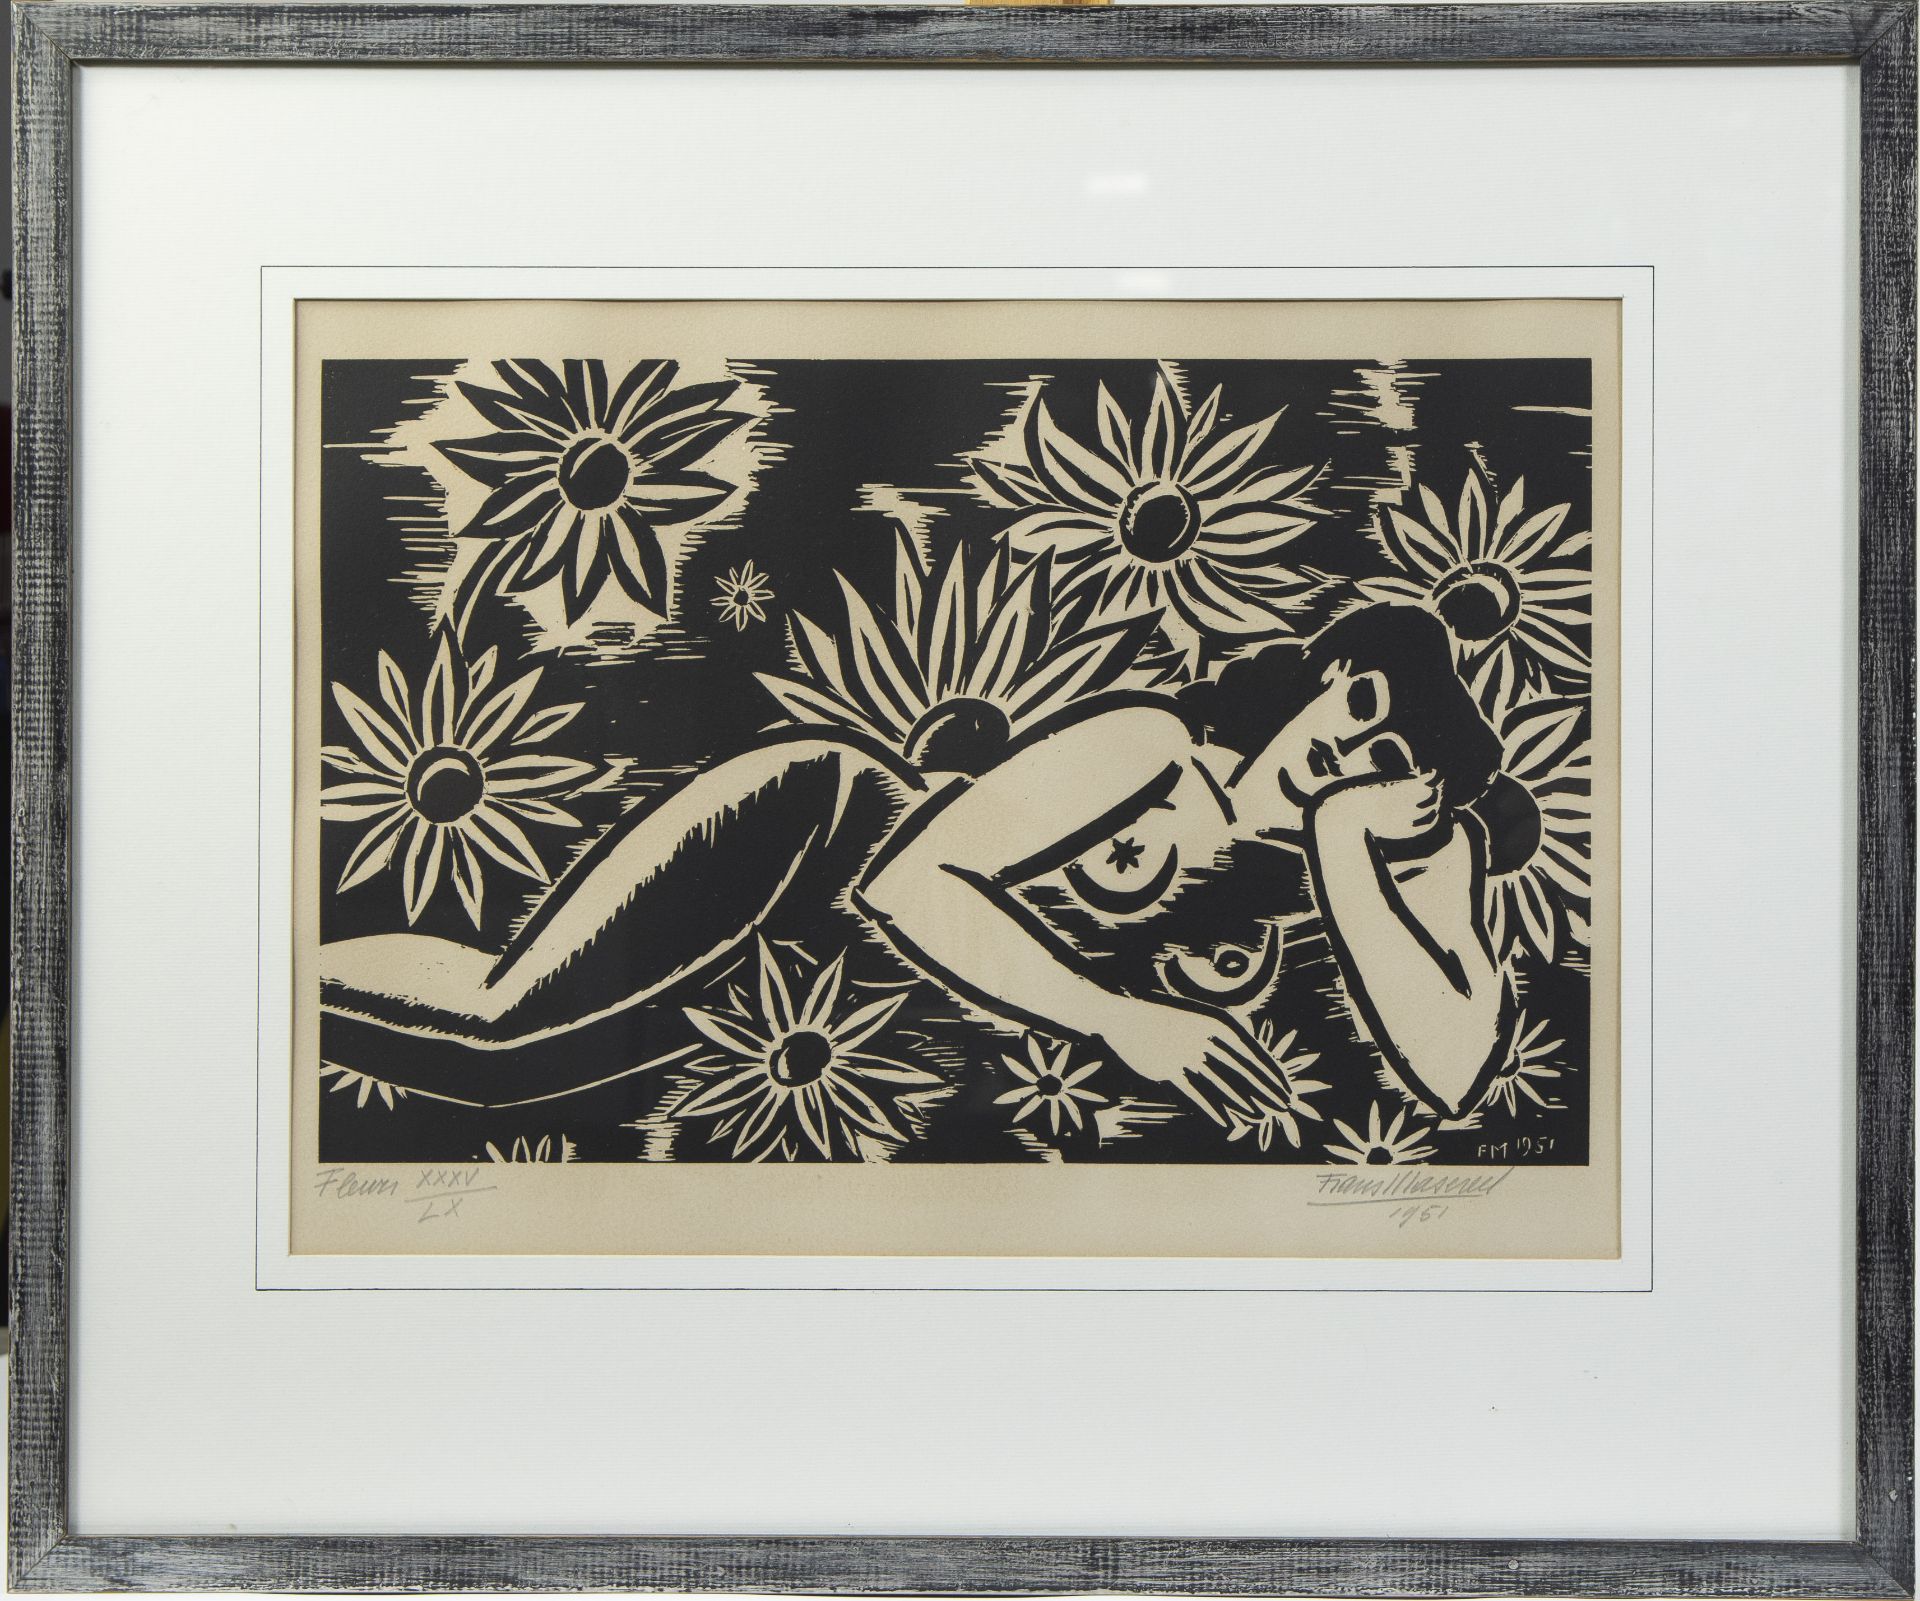 Frans MASEREEL (1889-1972), woodcut Fleurs, numbered XXXV/LV, signed and dated 1951 - Image 2 of 4